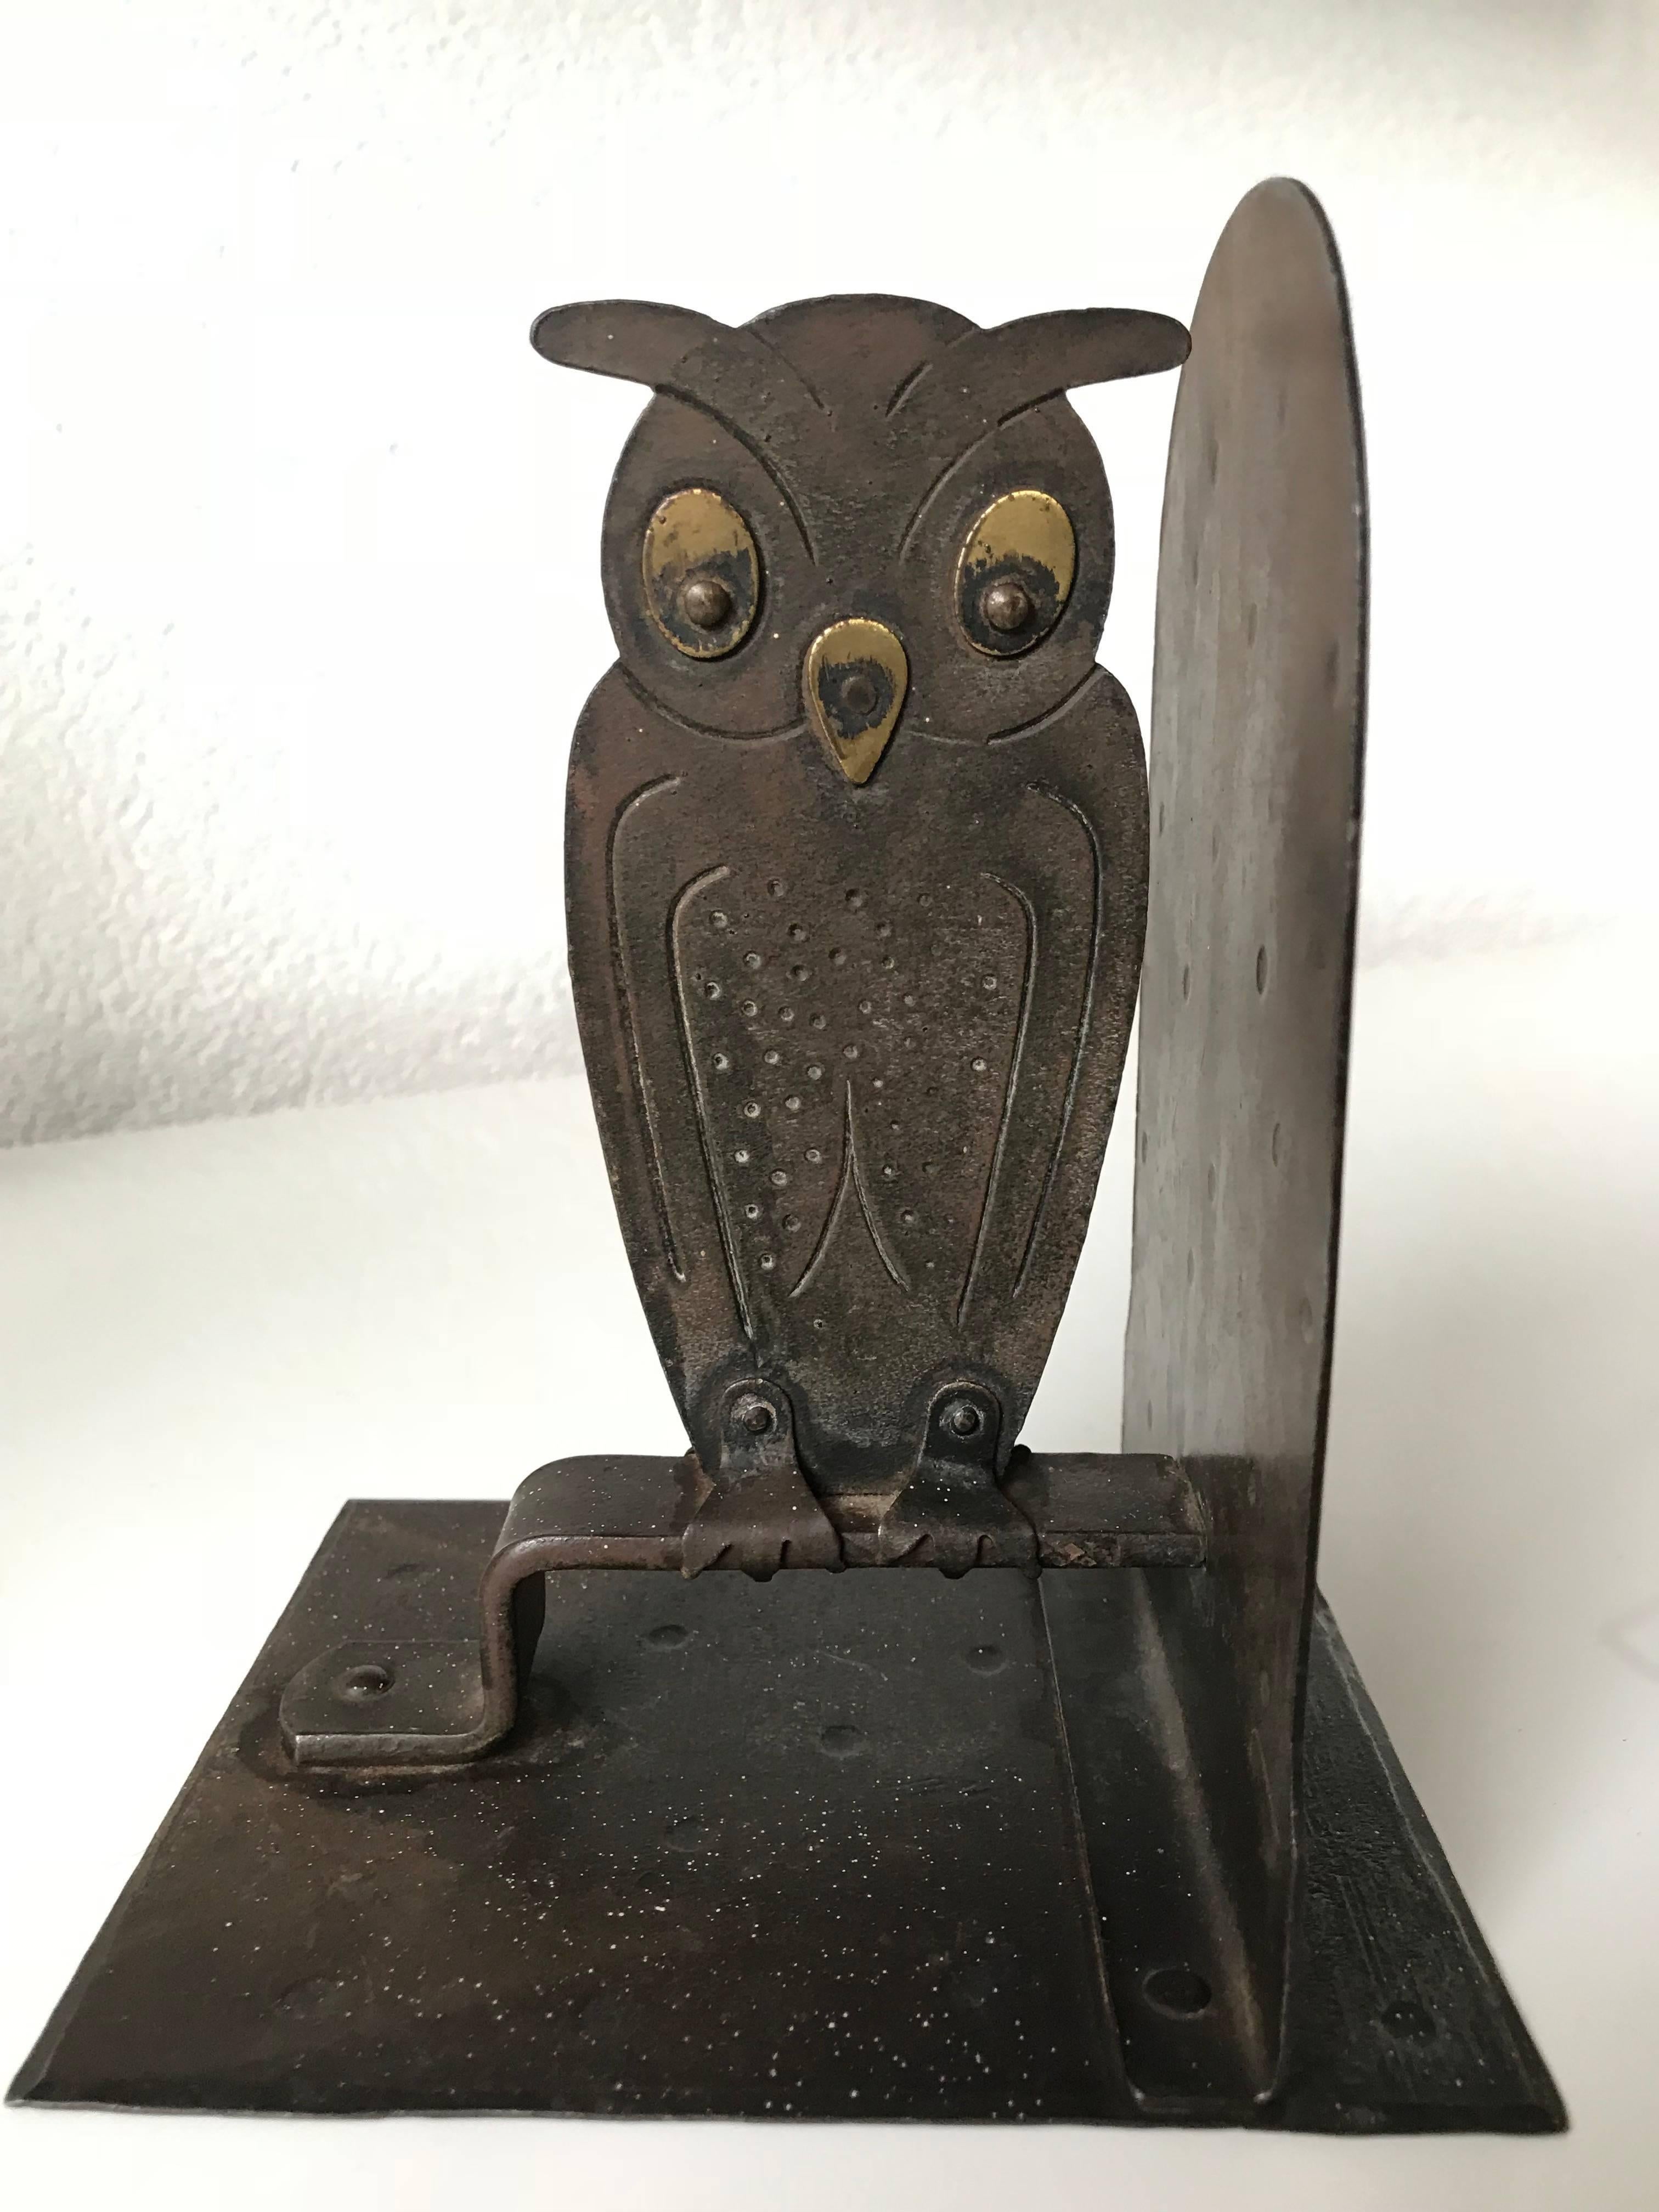 Arts and Crafts Vintage 1920s Hammered Metal Owl Bookend by Goberg, Hugo Berger, Germany